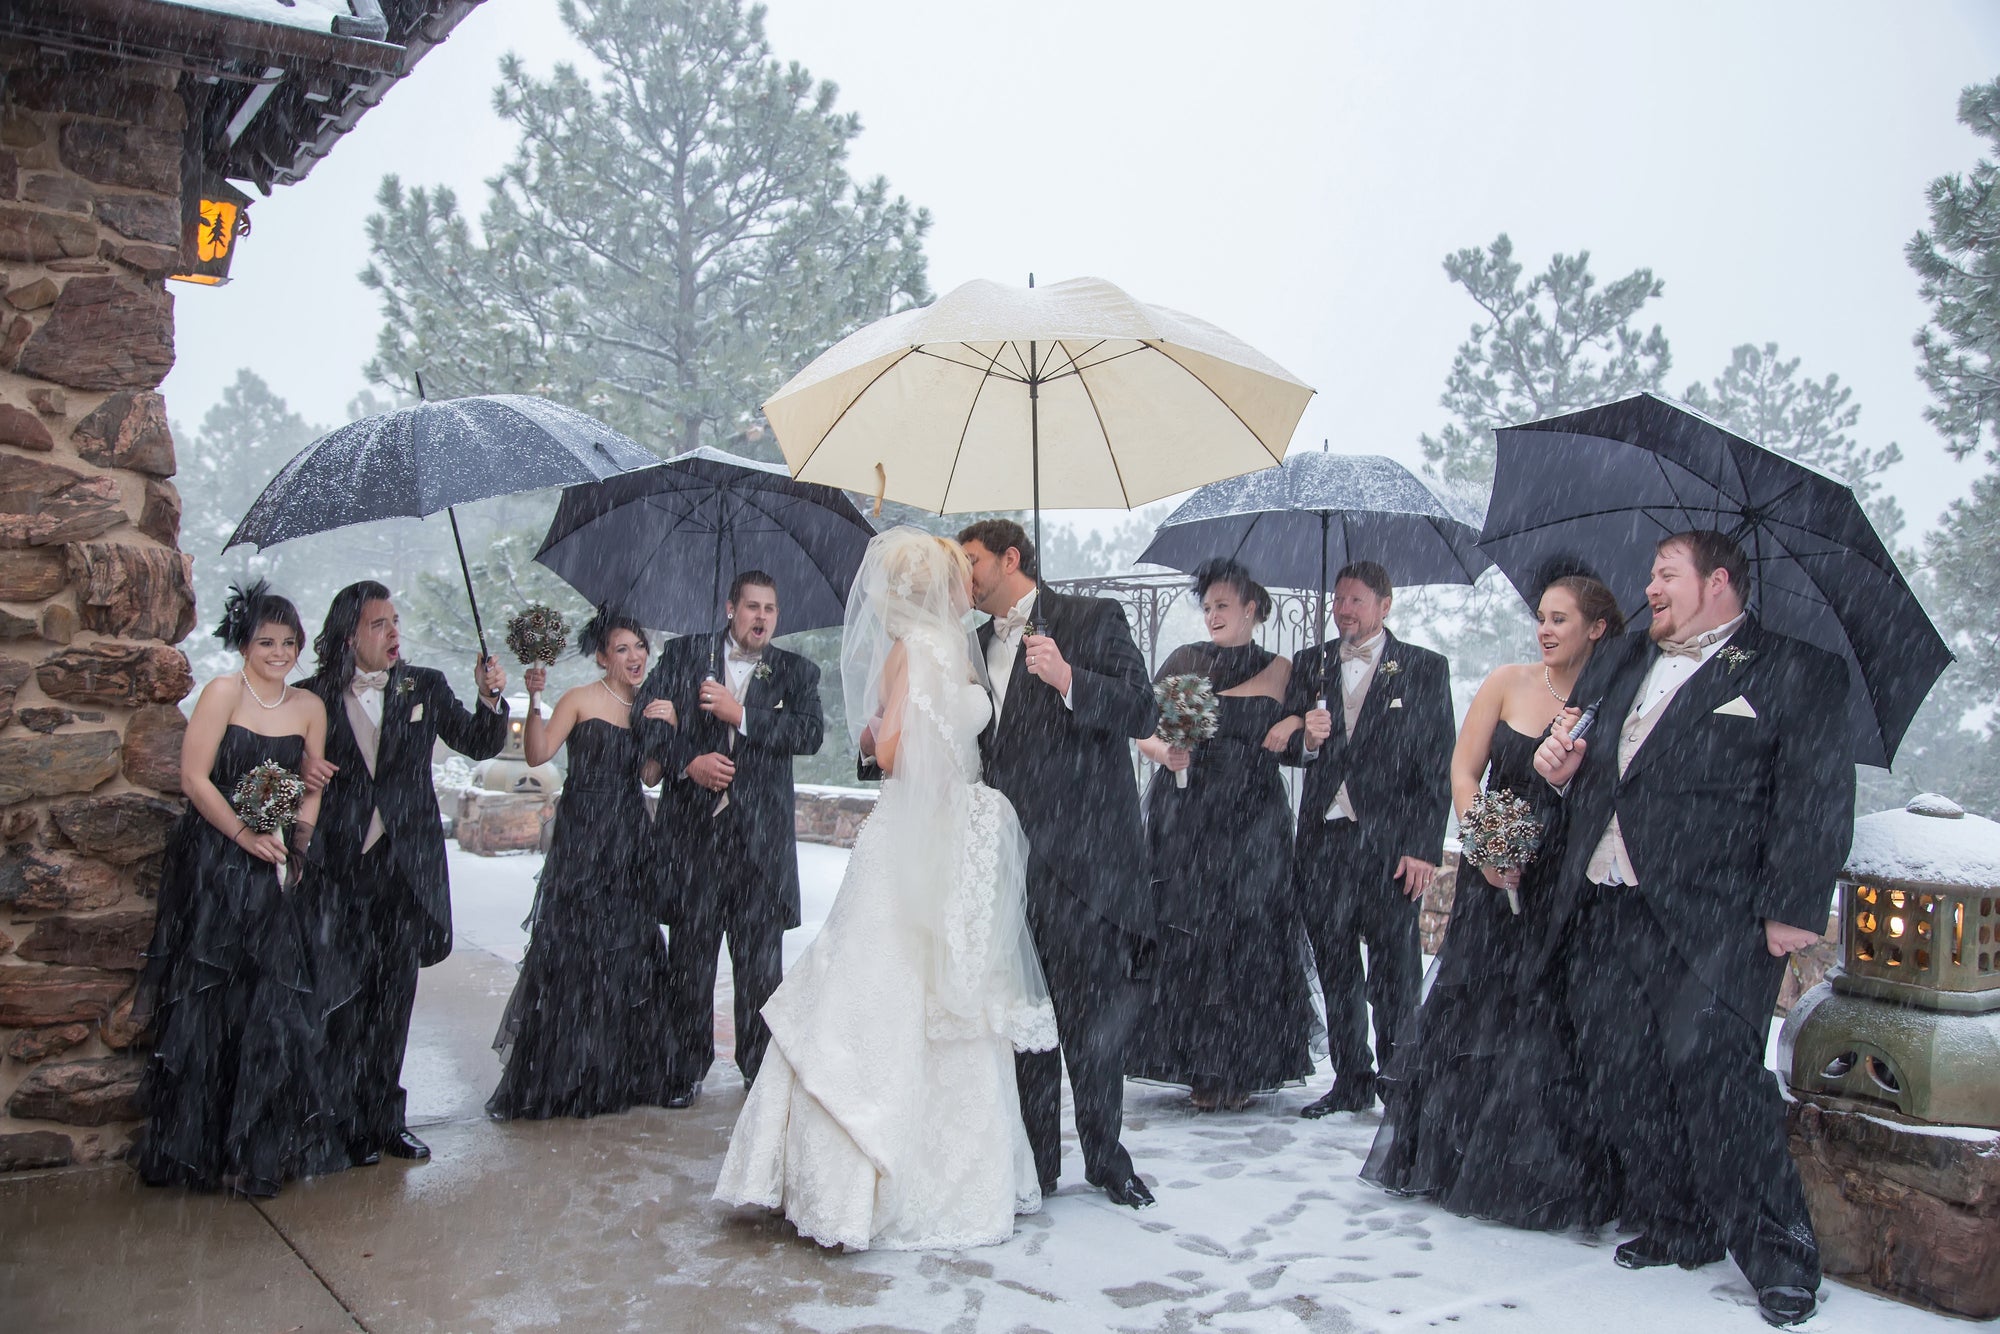 Umbrellas protecting wedding party from snow. Courtesy Allee Photography.